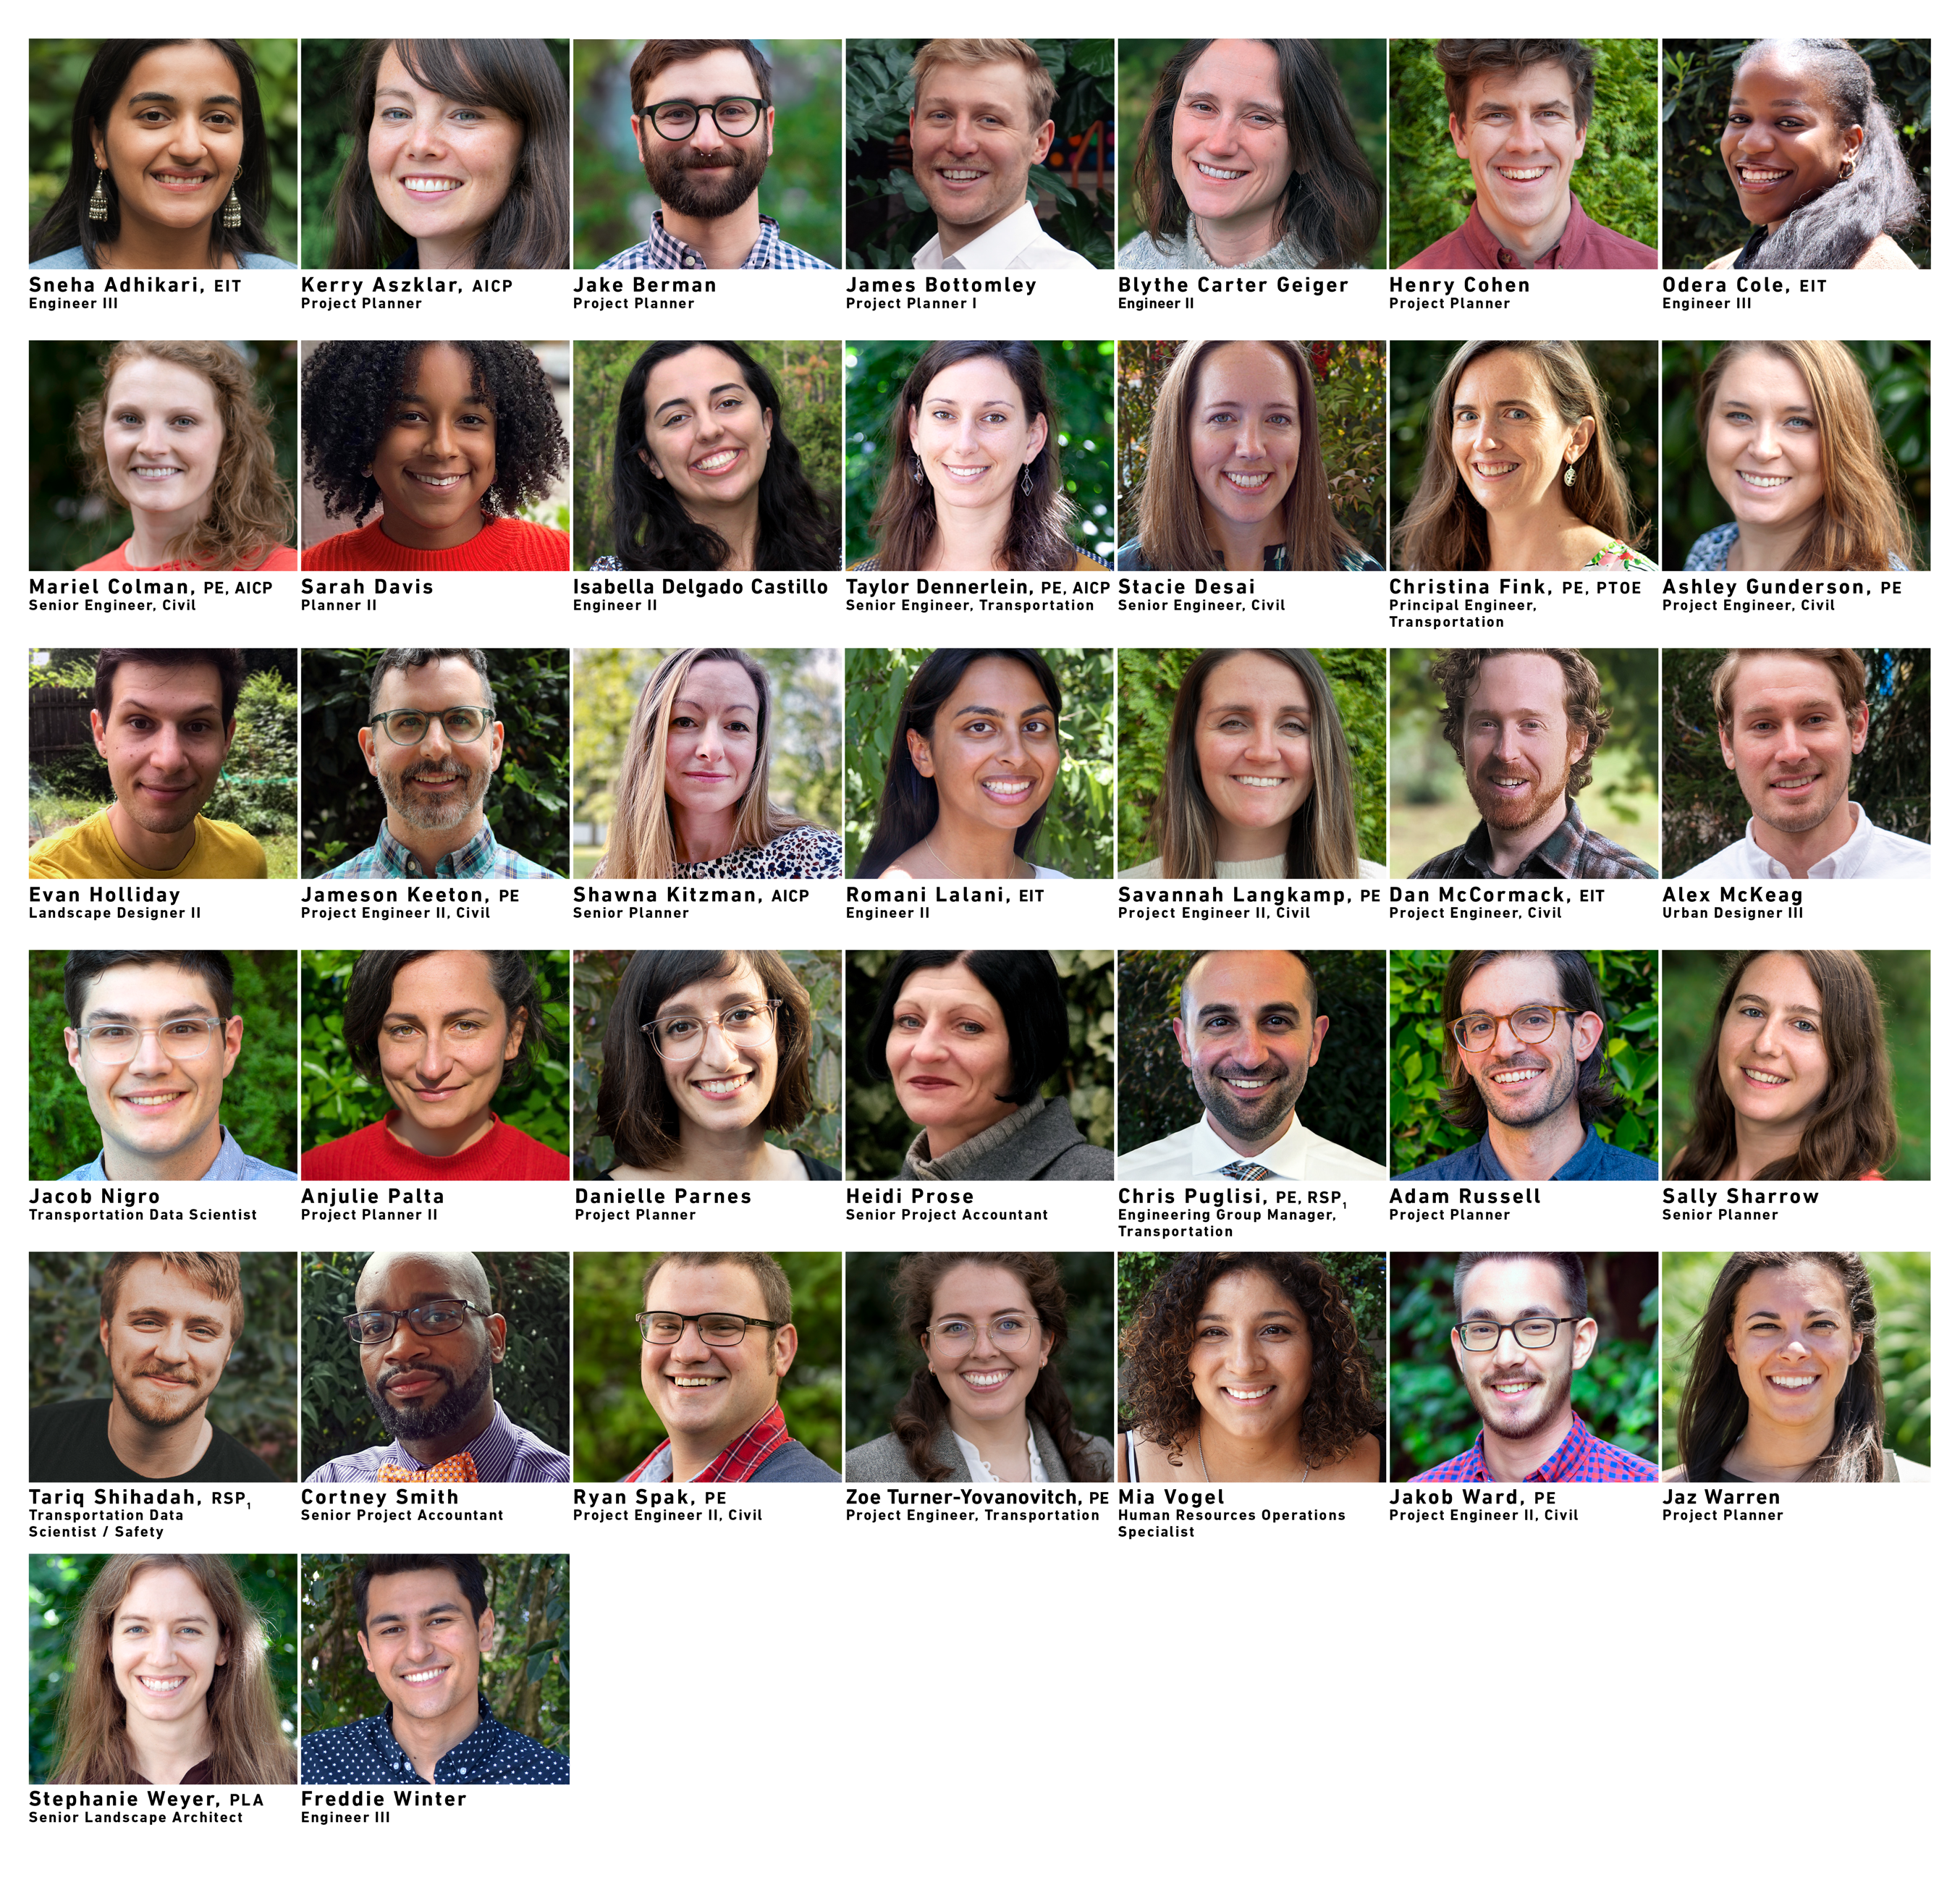 Grid of recently promoted staff headshots with names and position titles